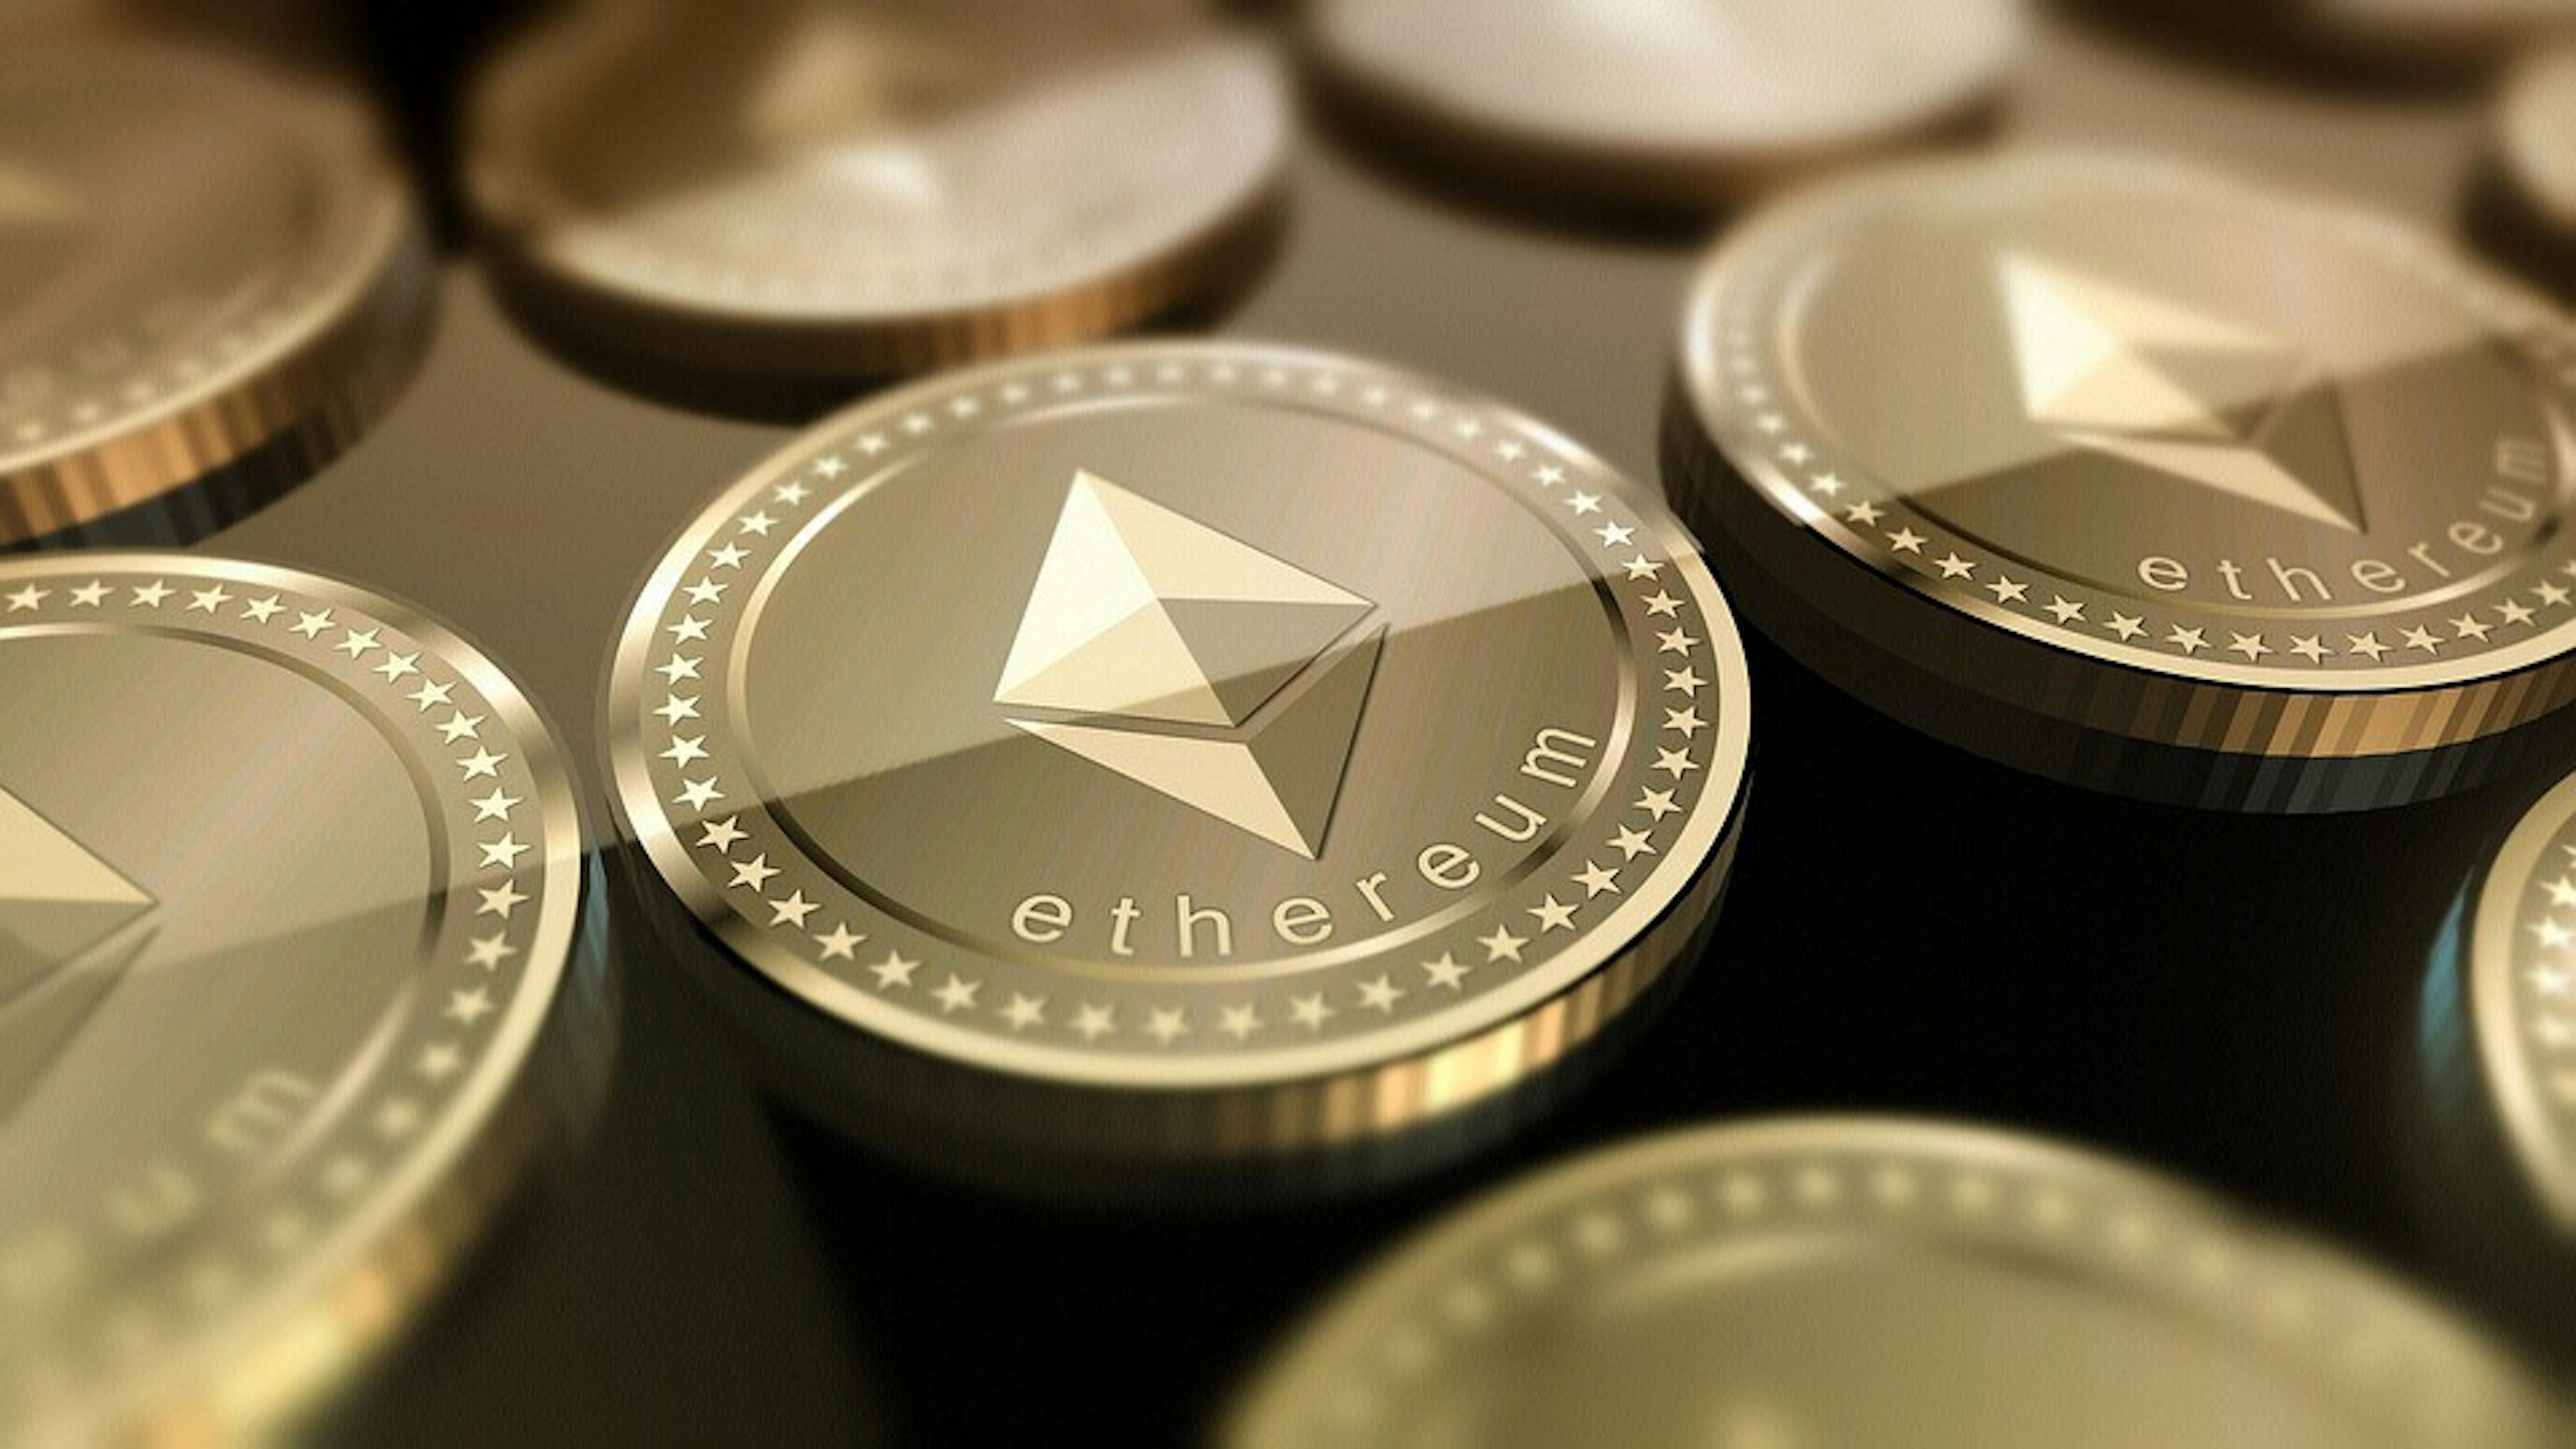 /how-ethereum-is-very-likely-to-become-a-leading-blockchain-platform-110ea9d49372 feature image